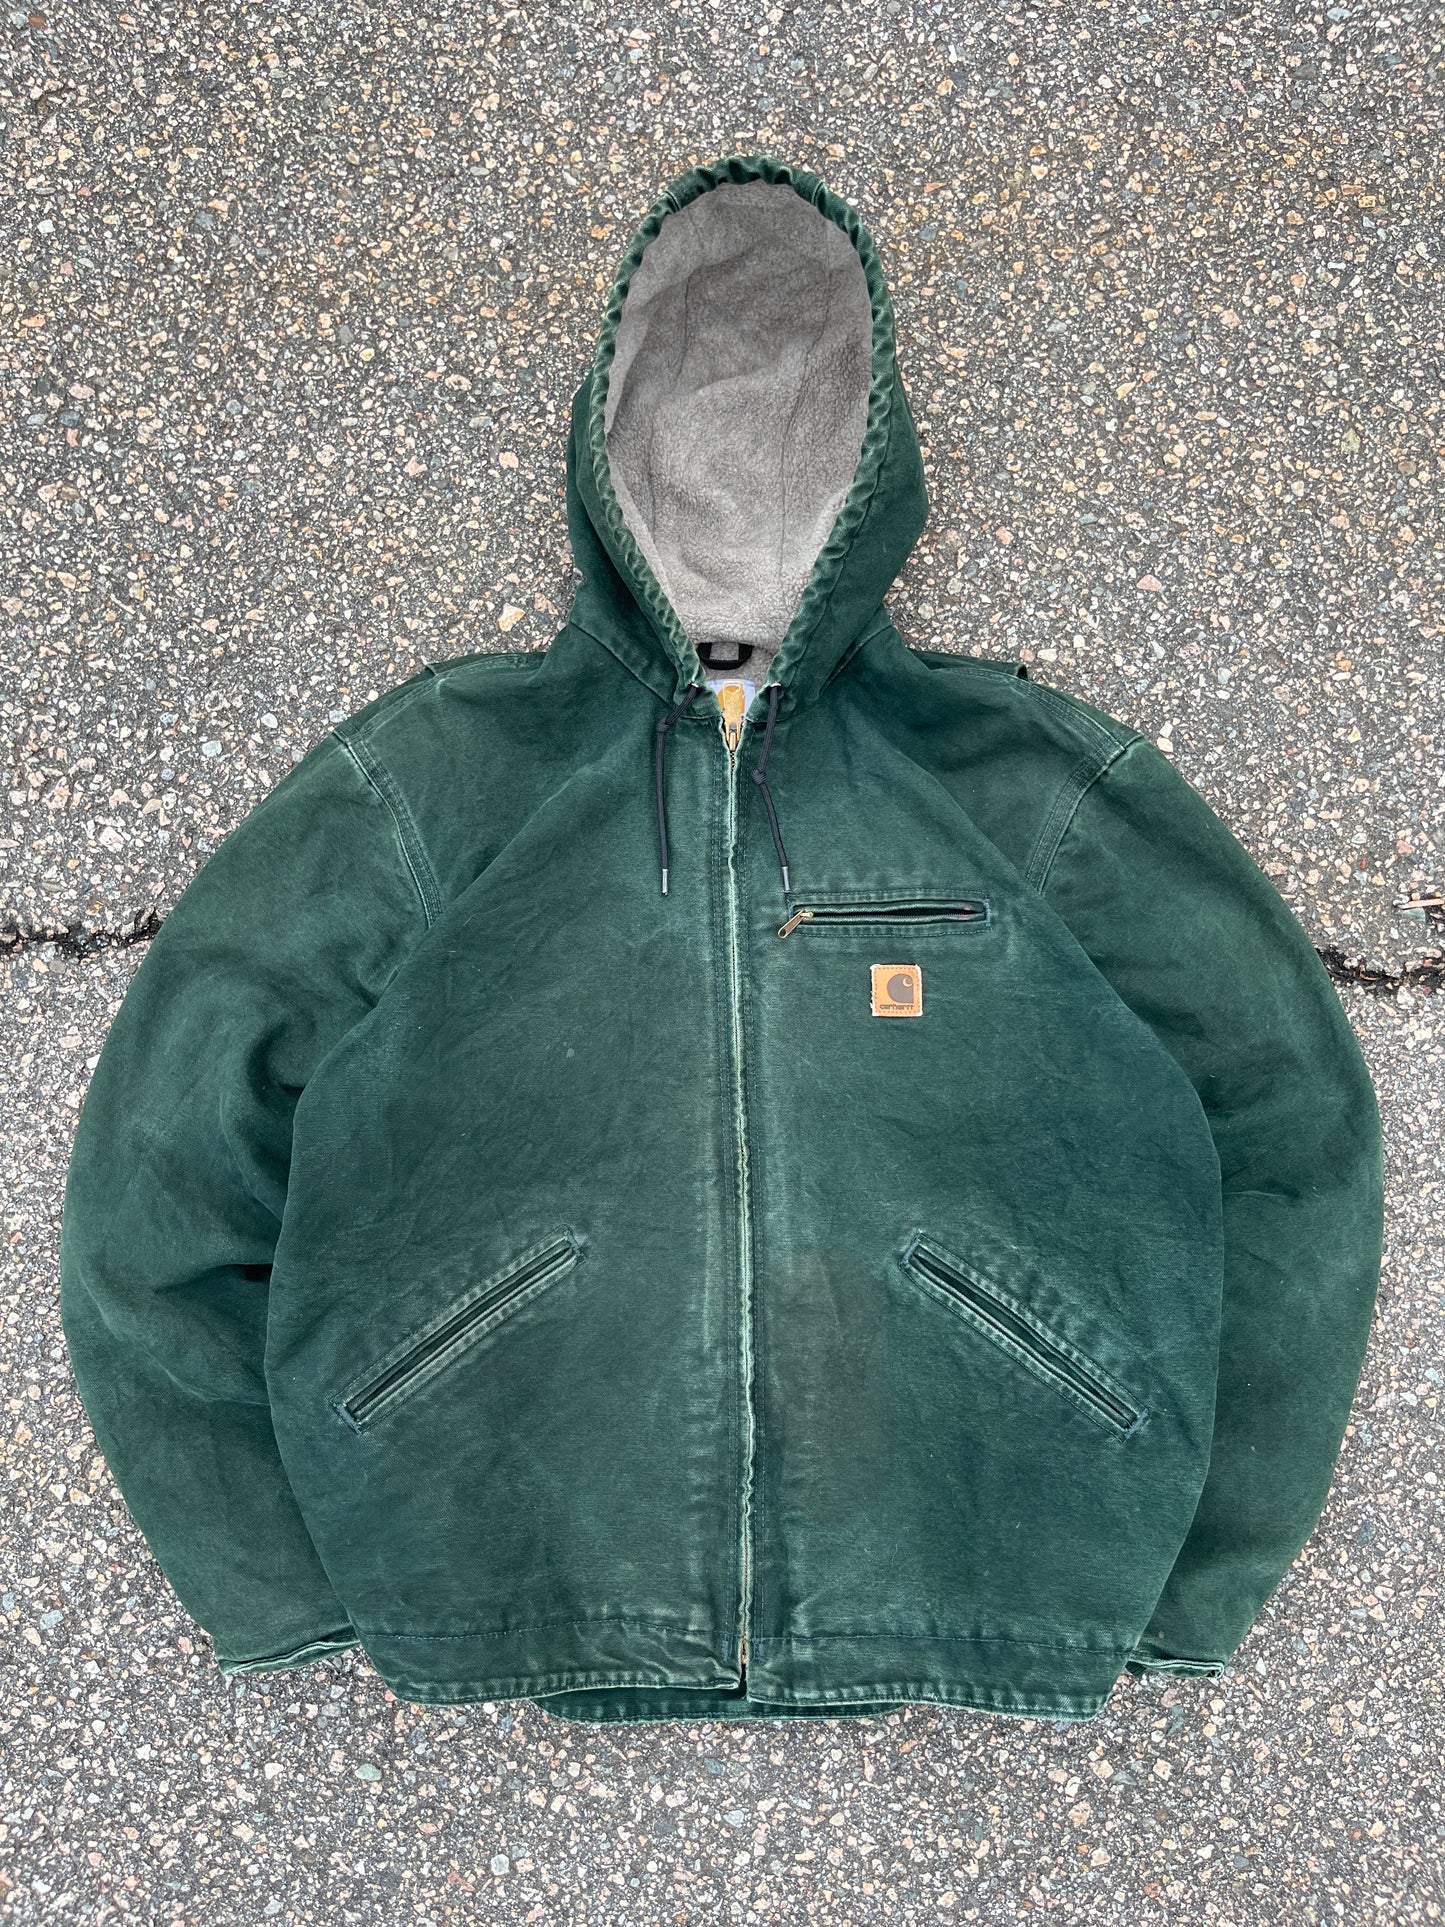 Faded Spruce Green Sherpa Lined Carhartt Jacket - Large